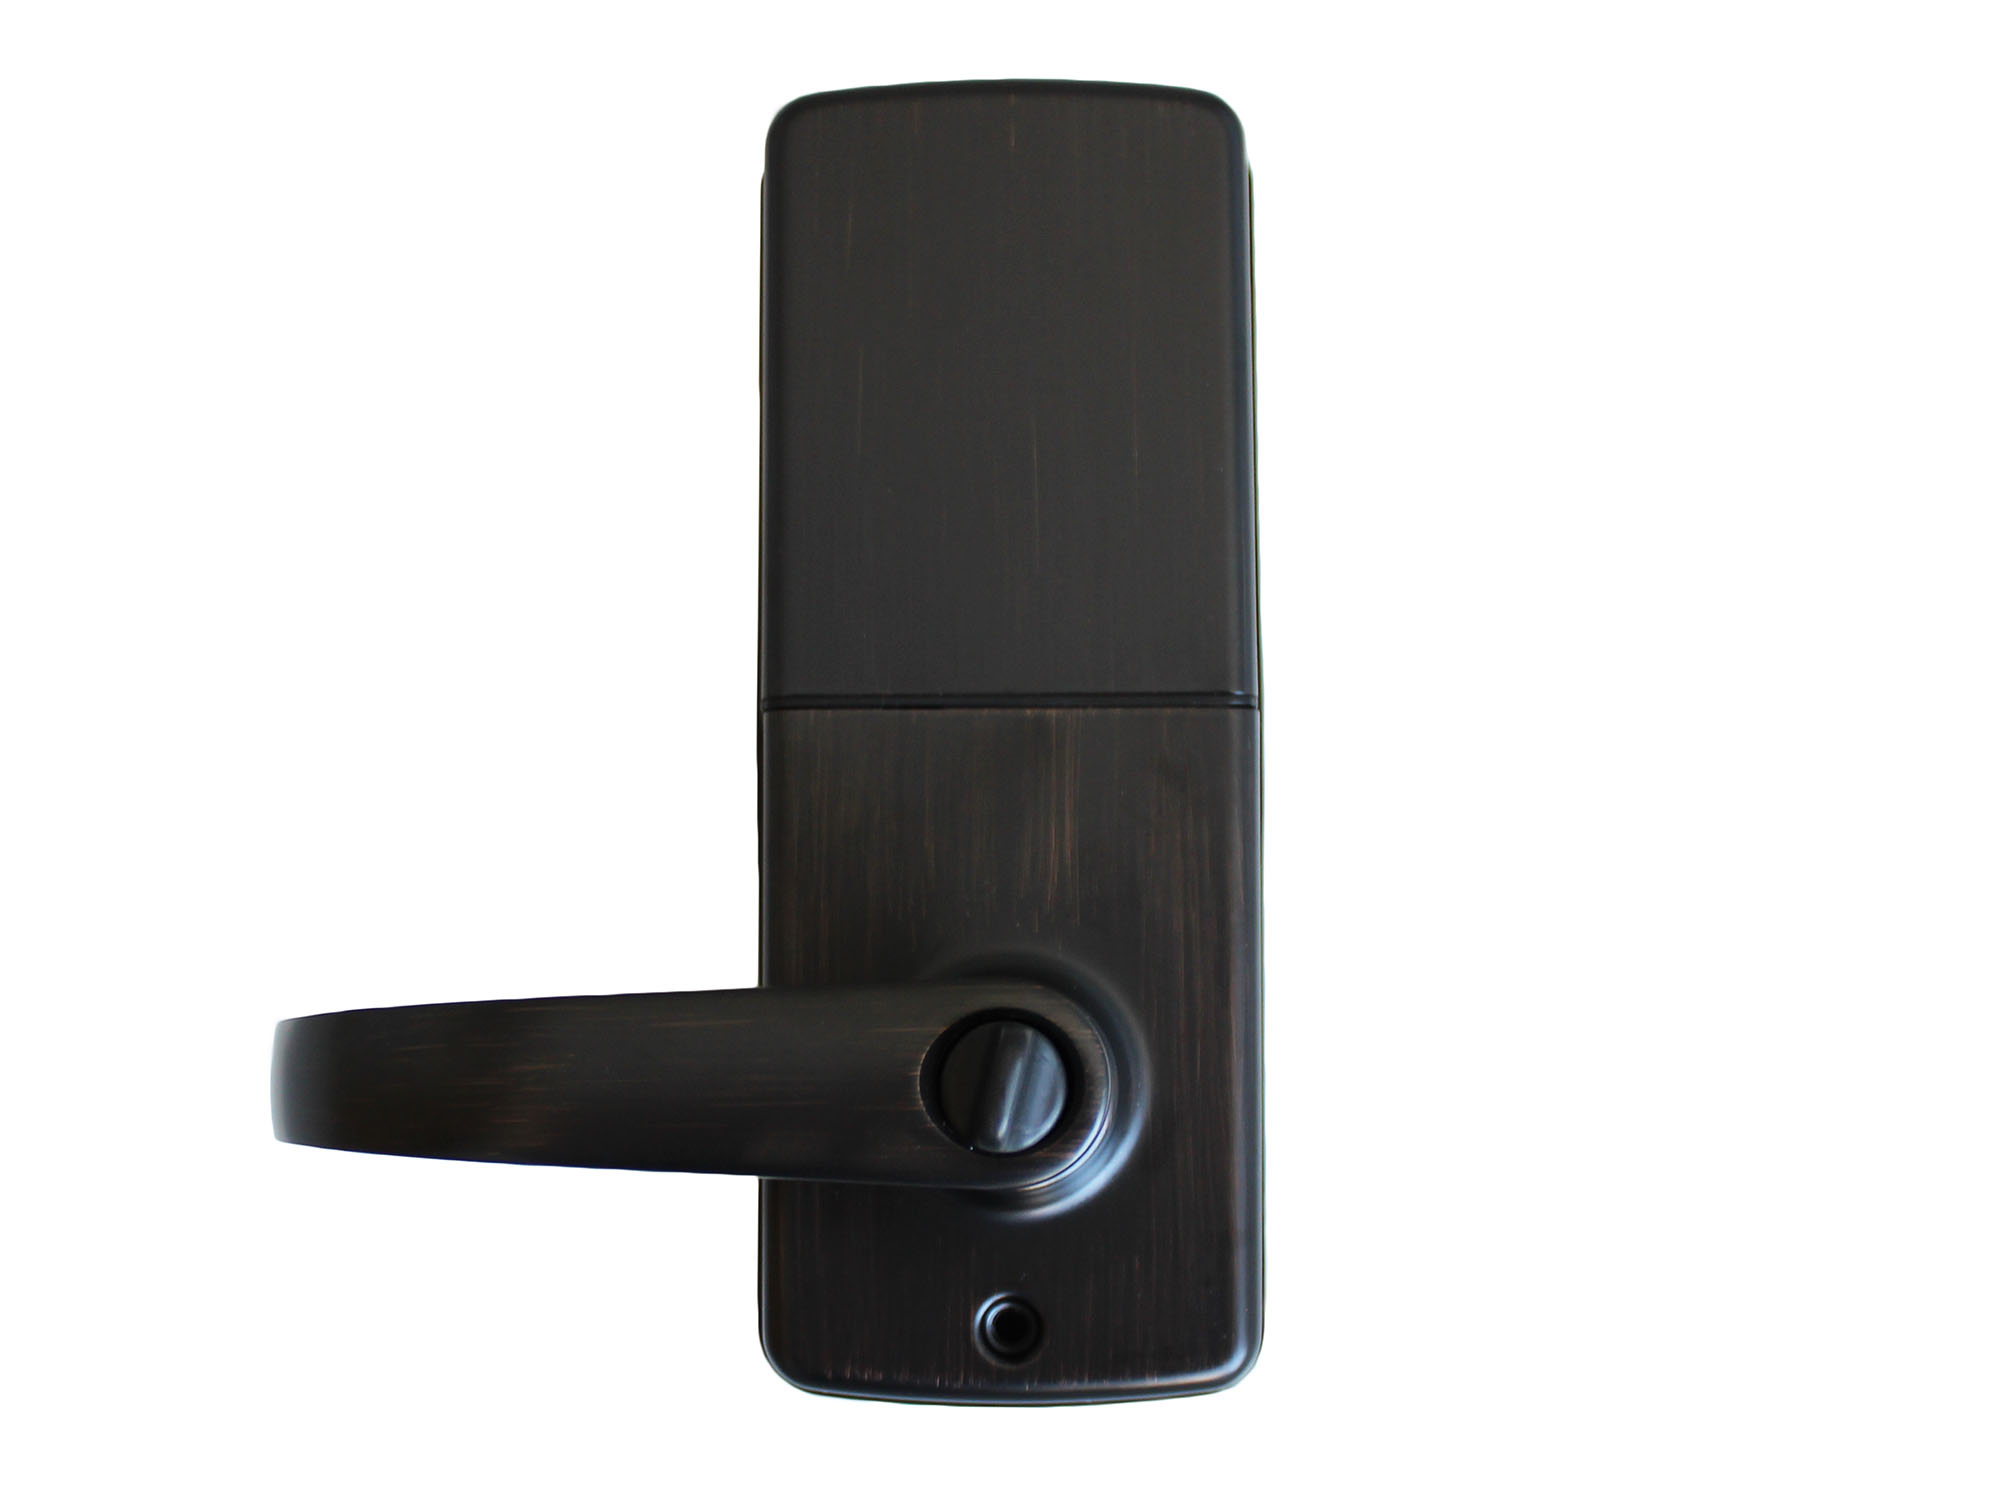 Lockey E995 Electronic Lever-Handle Latchbolt Lock with Lighted Keypad - Click Image to Close